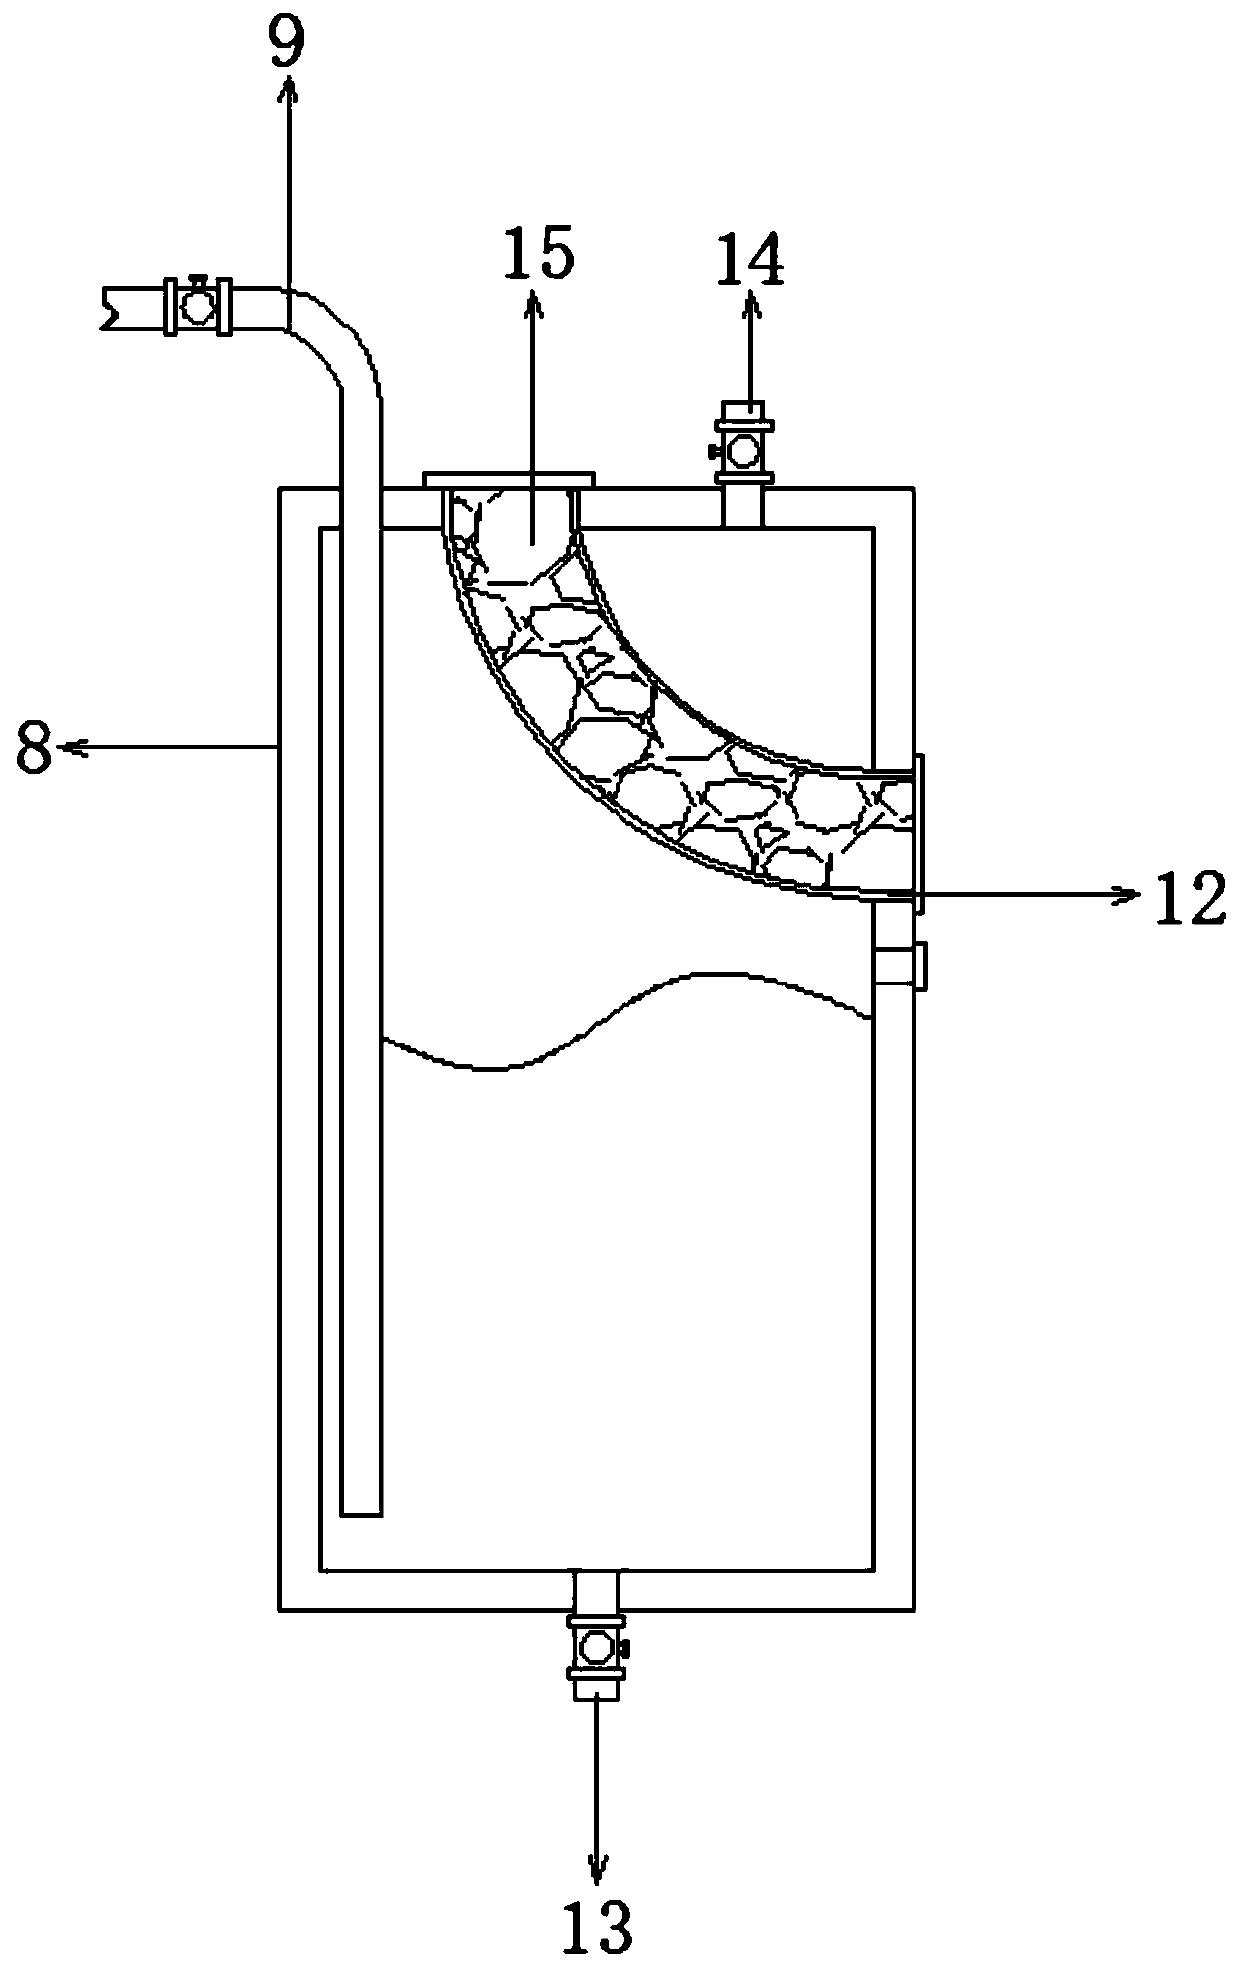 Melting device for plastic processing